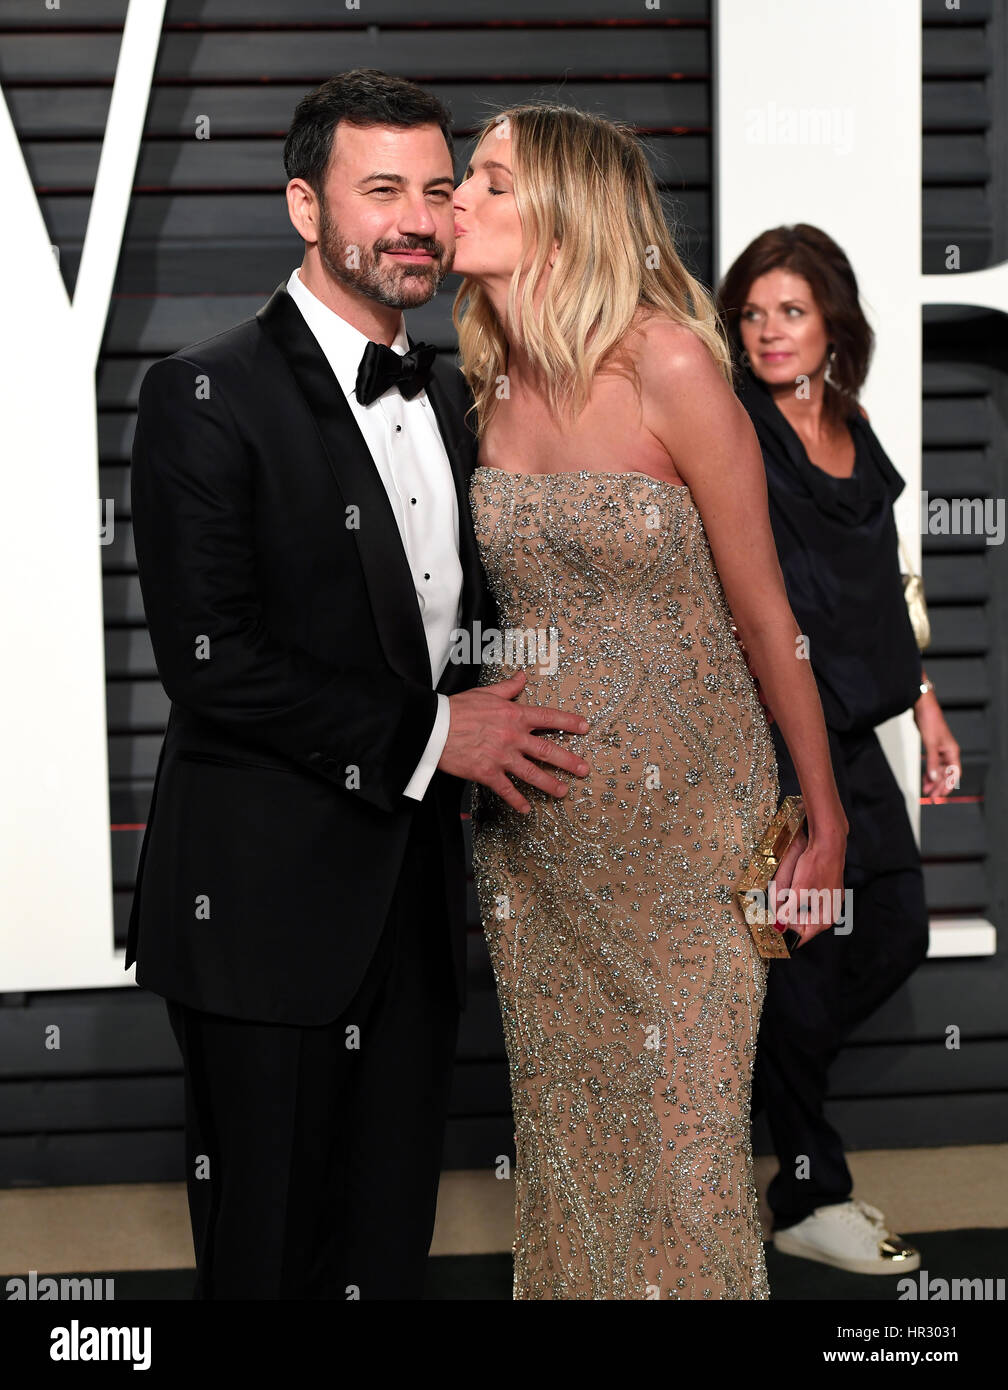 Jimmy Kimmel and Molly McNearney arriving at the Vanity Fair Oscar Party in Beverly Hills, Los Angeles, USA. Stock Photo